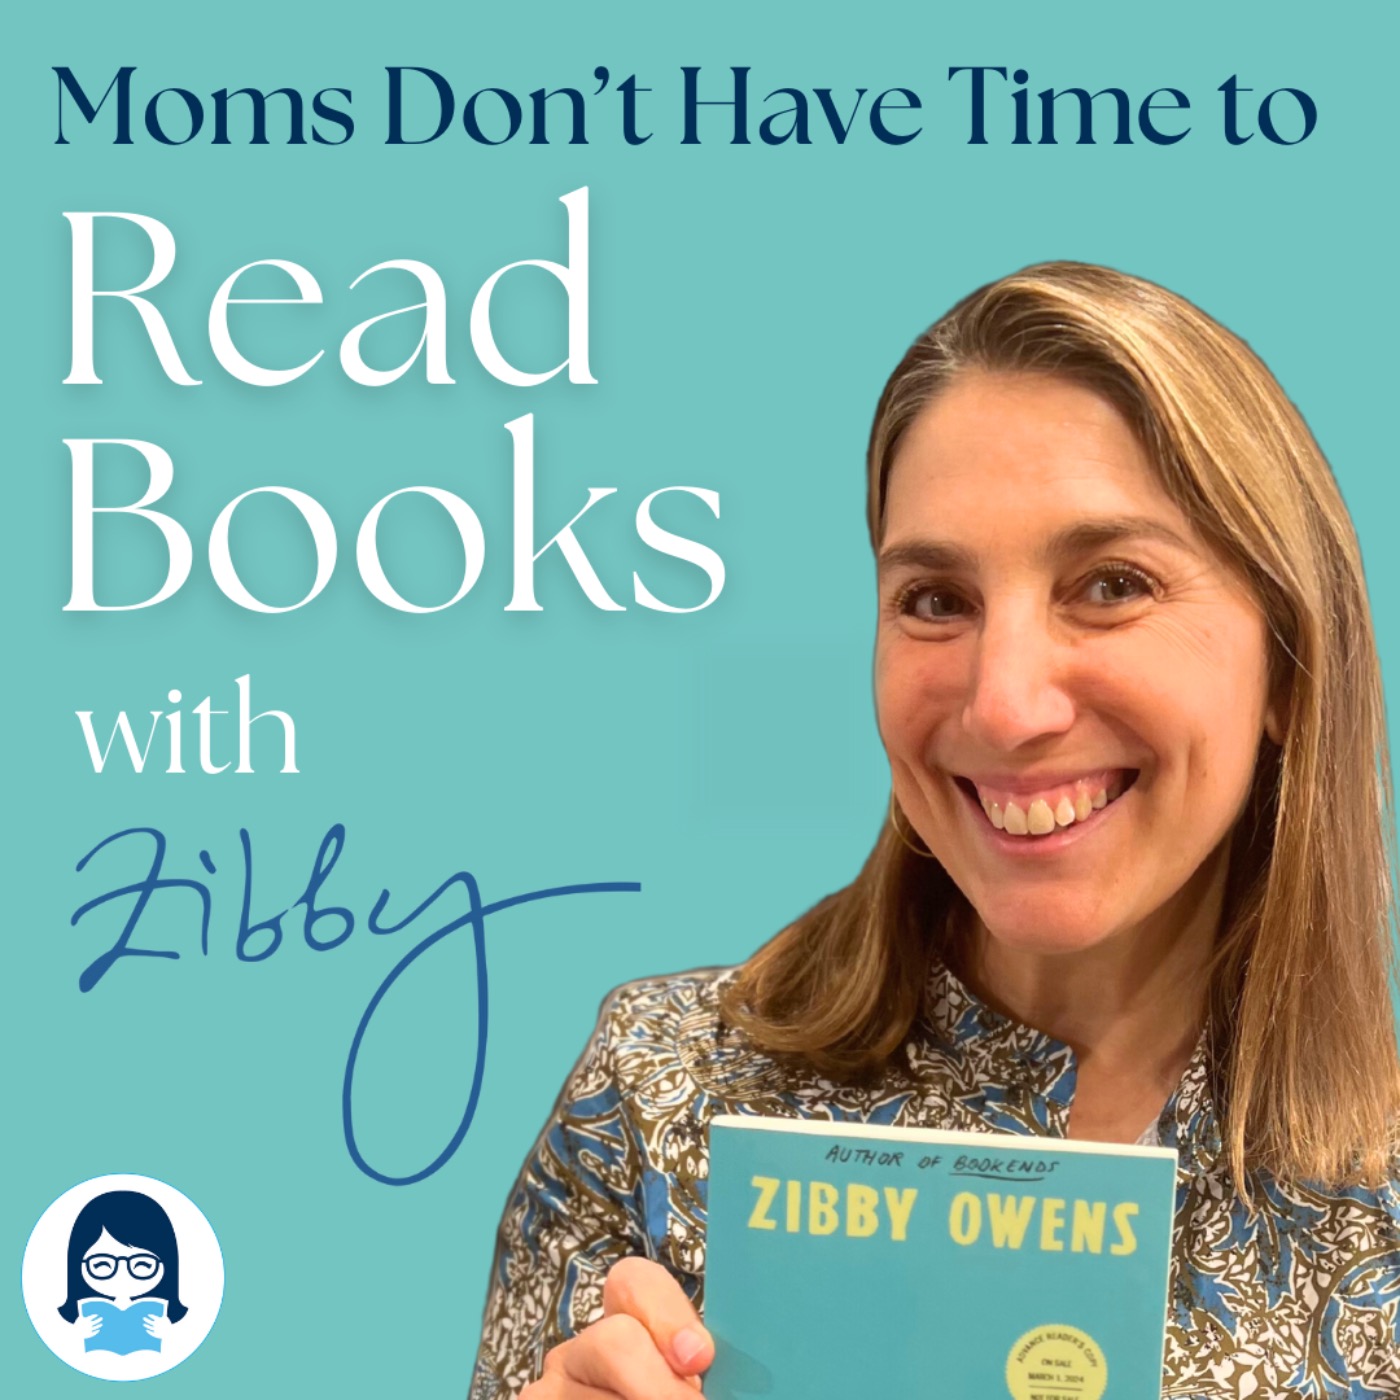 Moms Don't Have Time to Read Books with Zibby